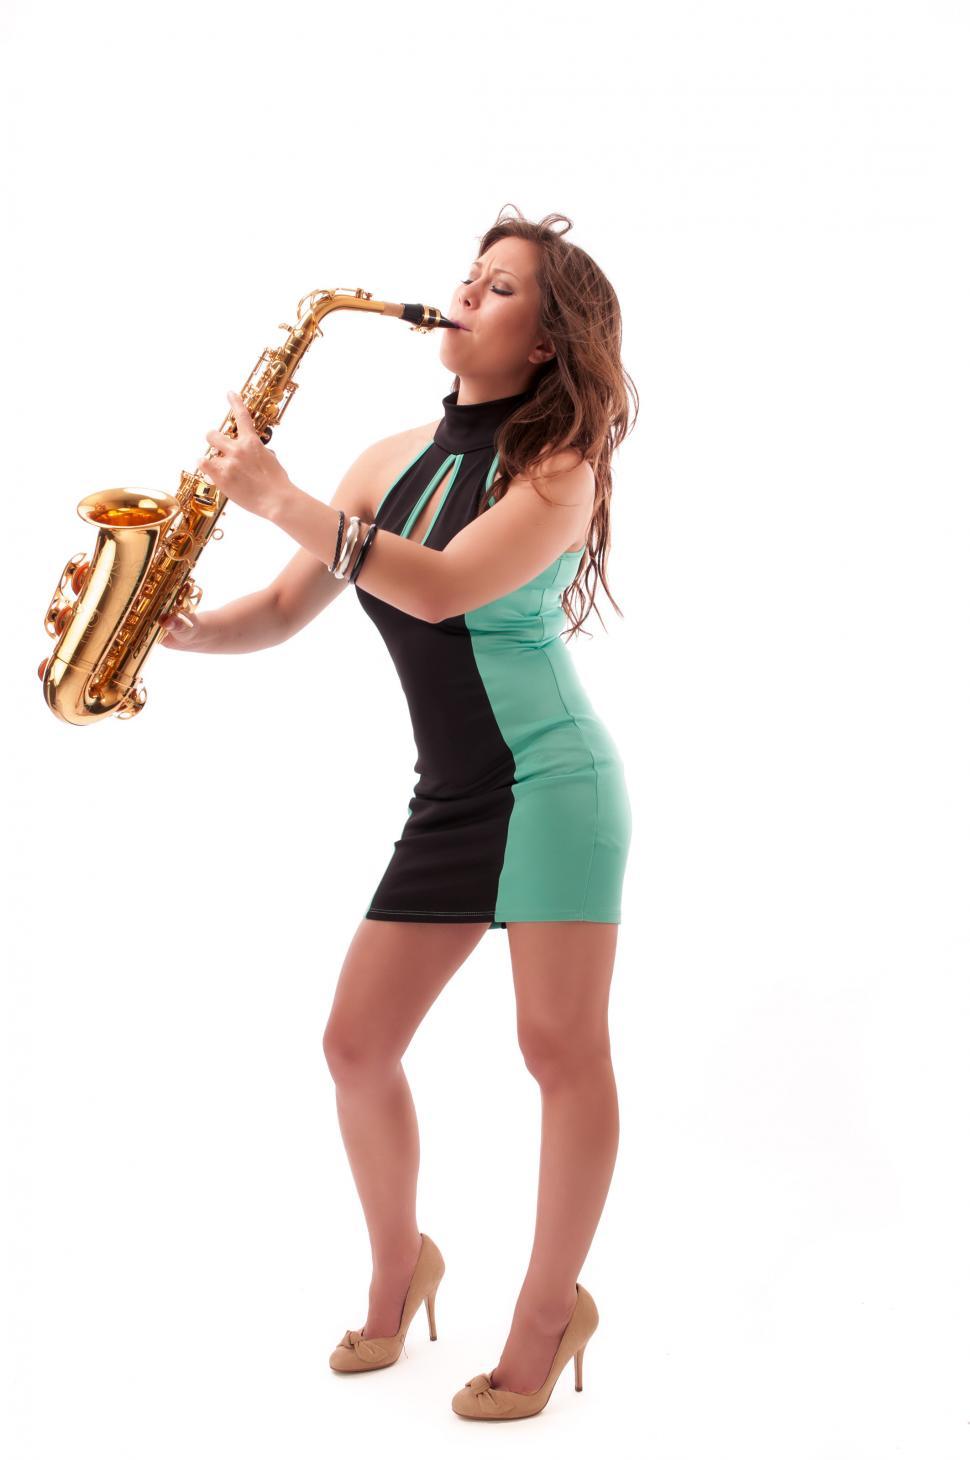 Free Image of Young woman playing the saxophone 